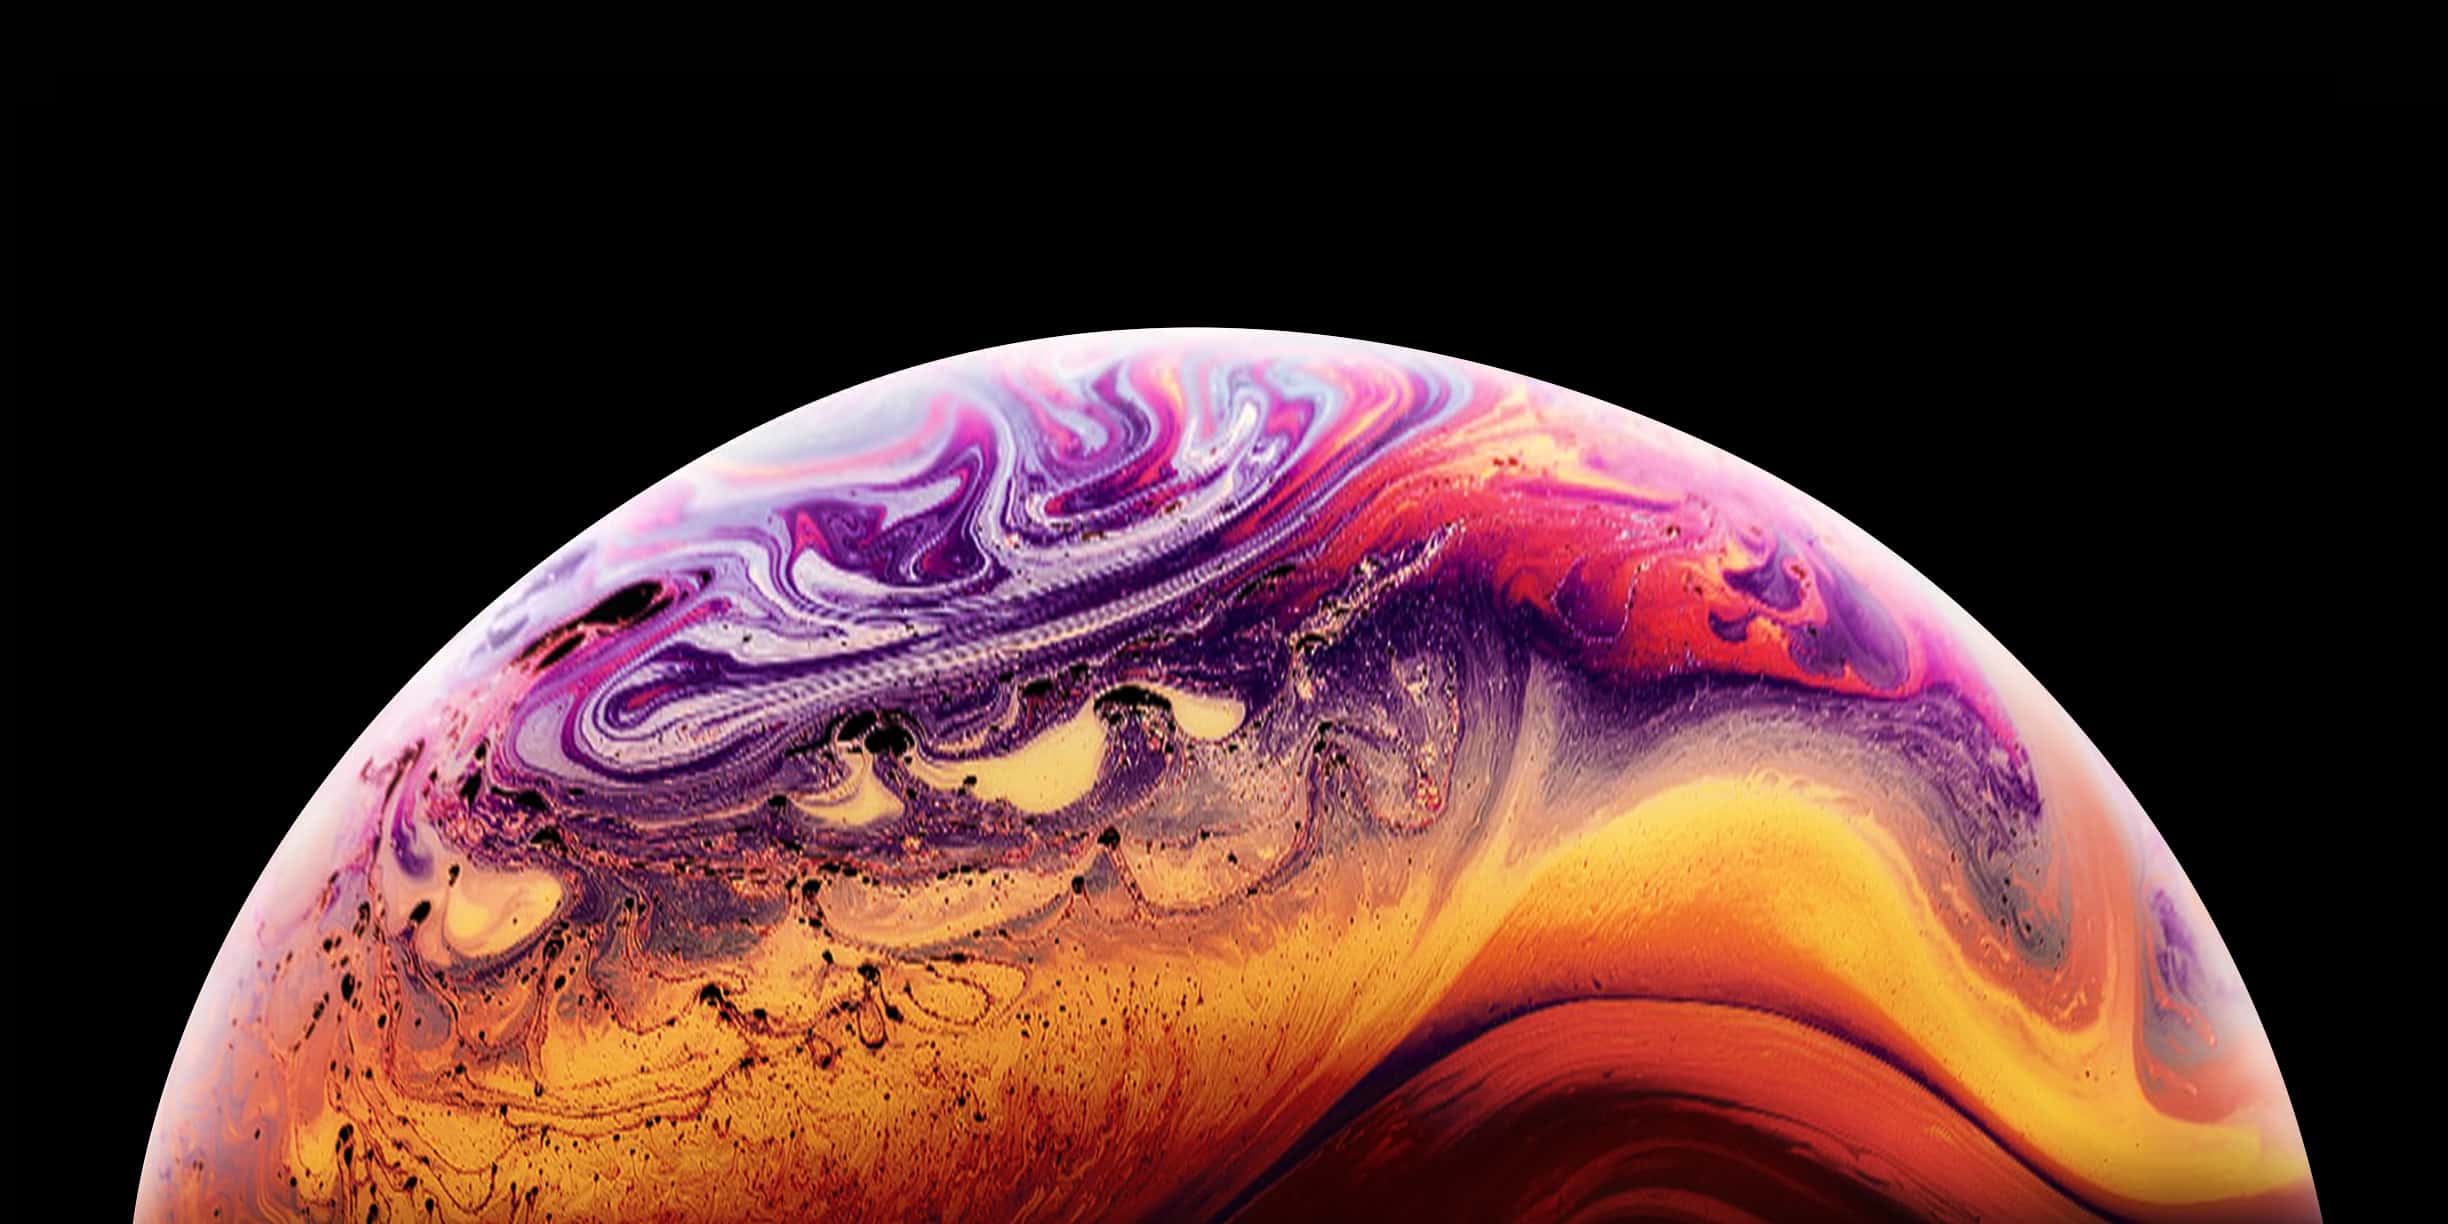 iphone xs max computer wallpapers